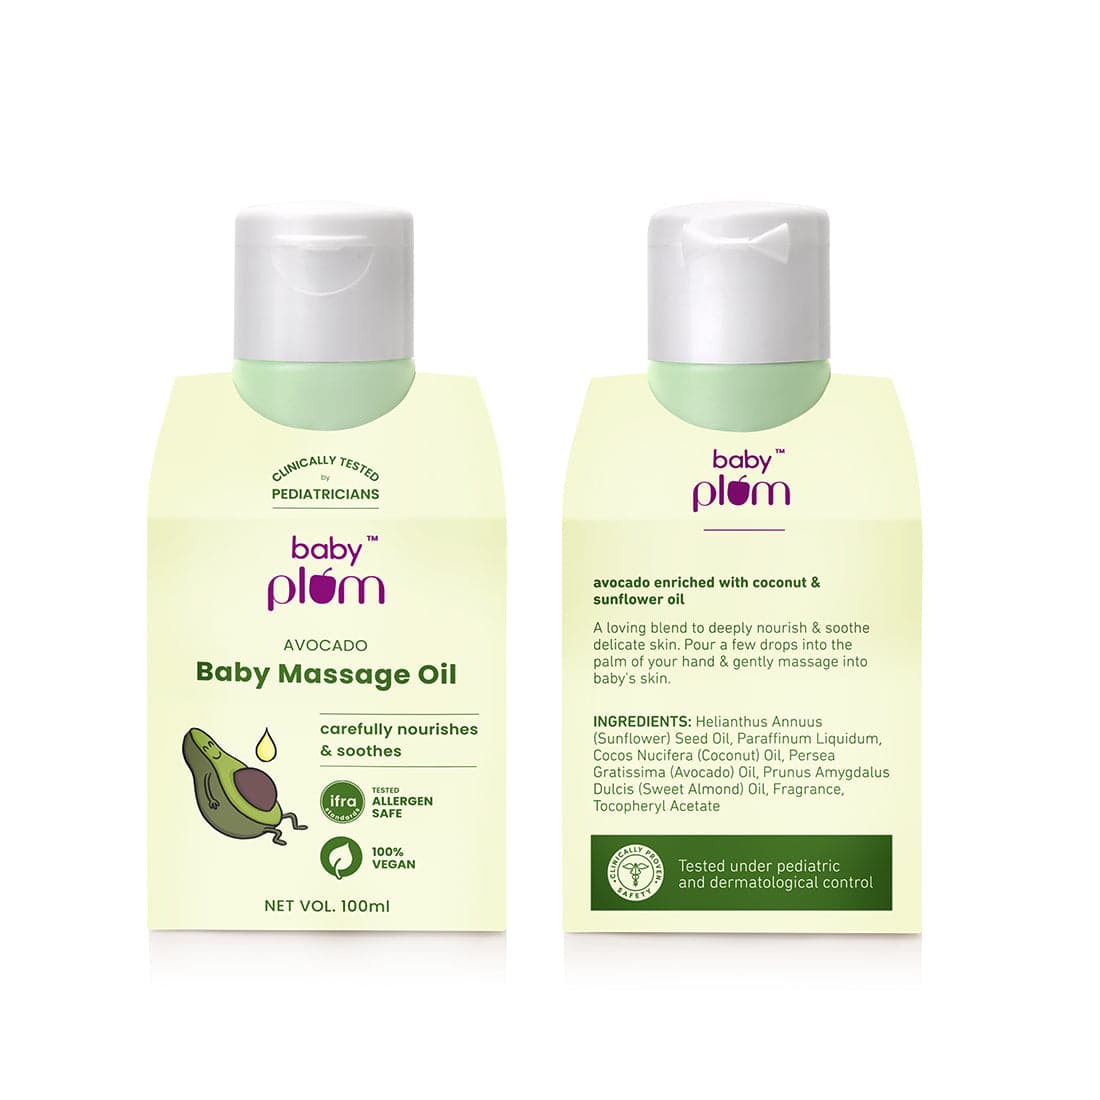 Baby Plum Avocado Body Massage Oil | Deeply Moisturizing Formula | Relaxes & Soothes Baby | Clinically Tested by Pediatricians | Enriched with Sunflower & Coconut Oil | Tested Allergen Safe